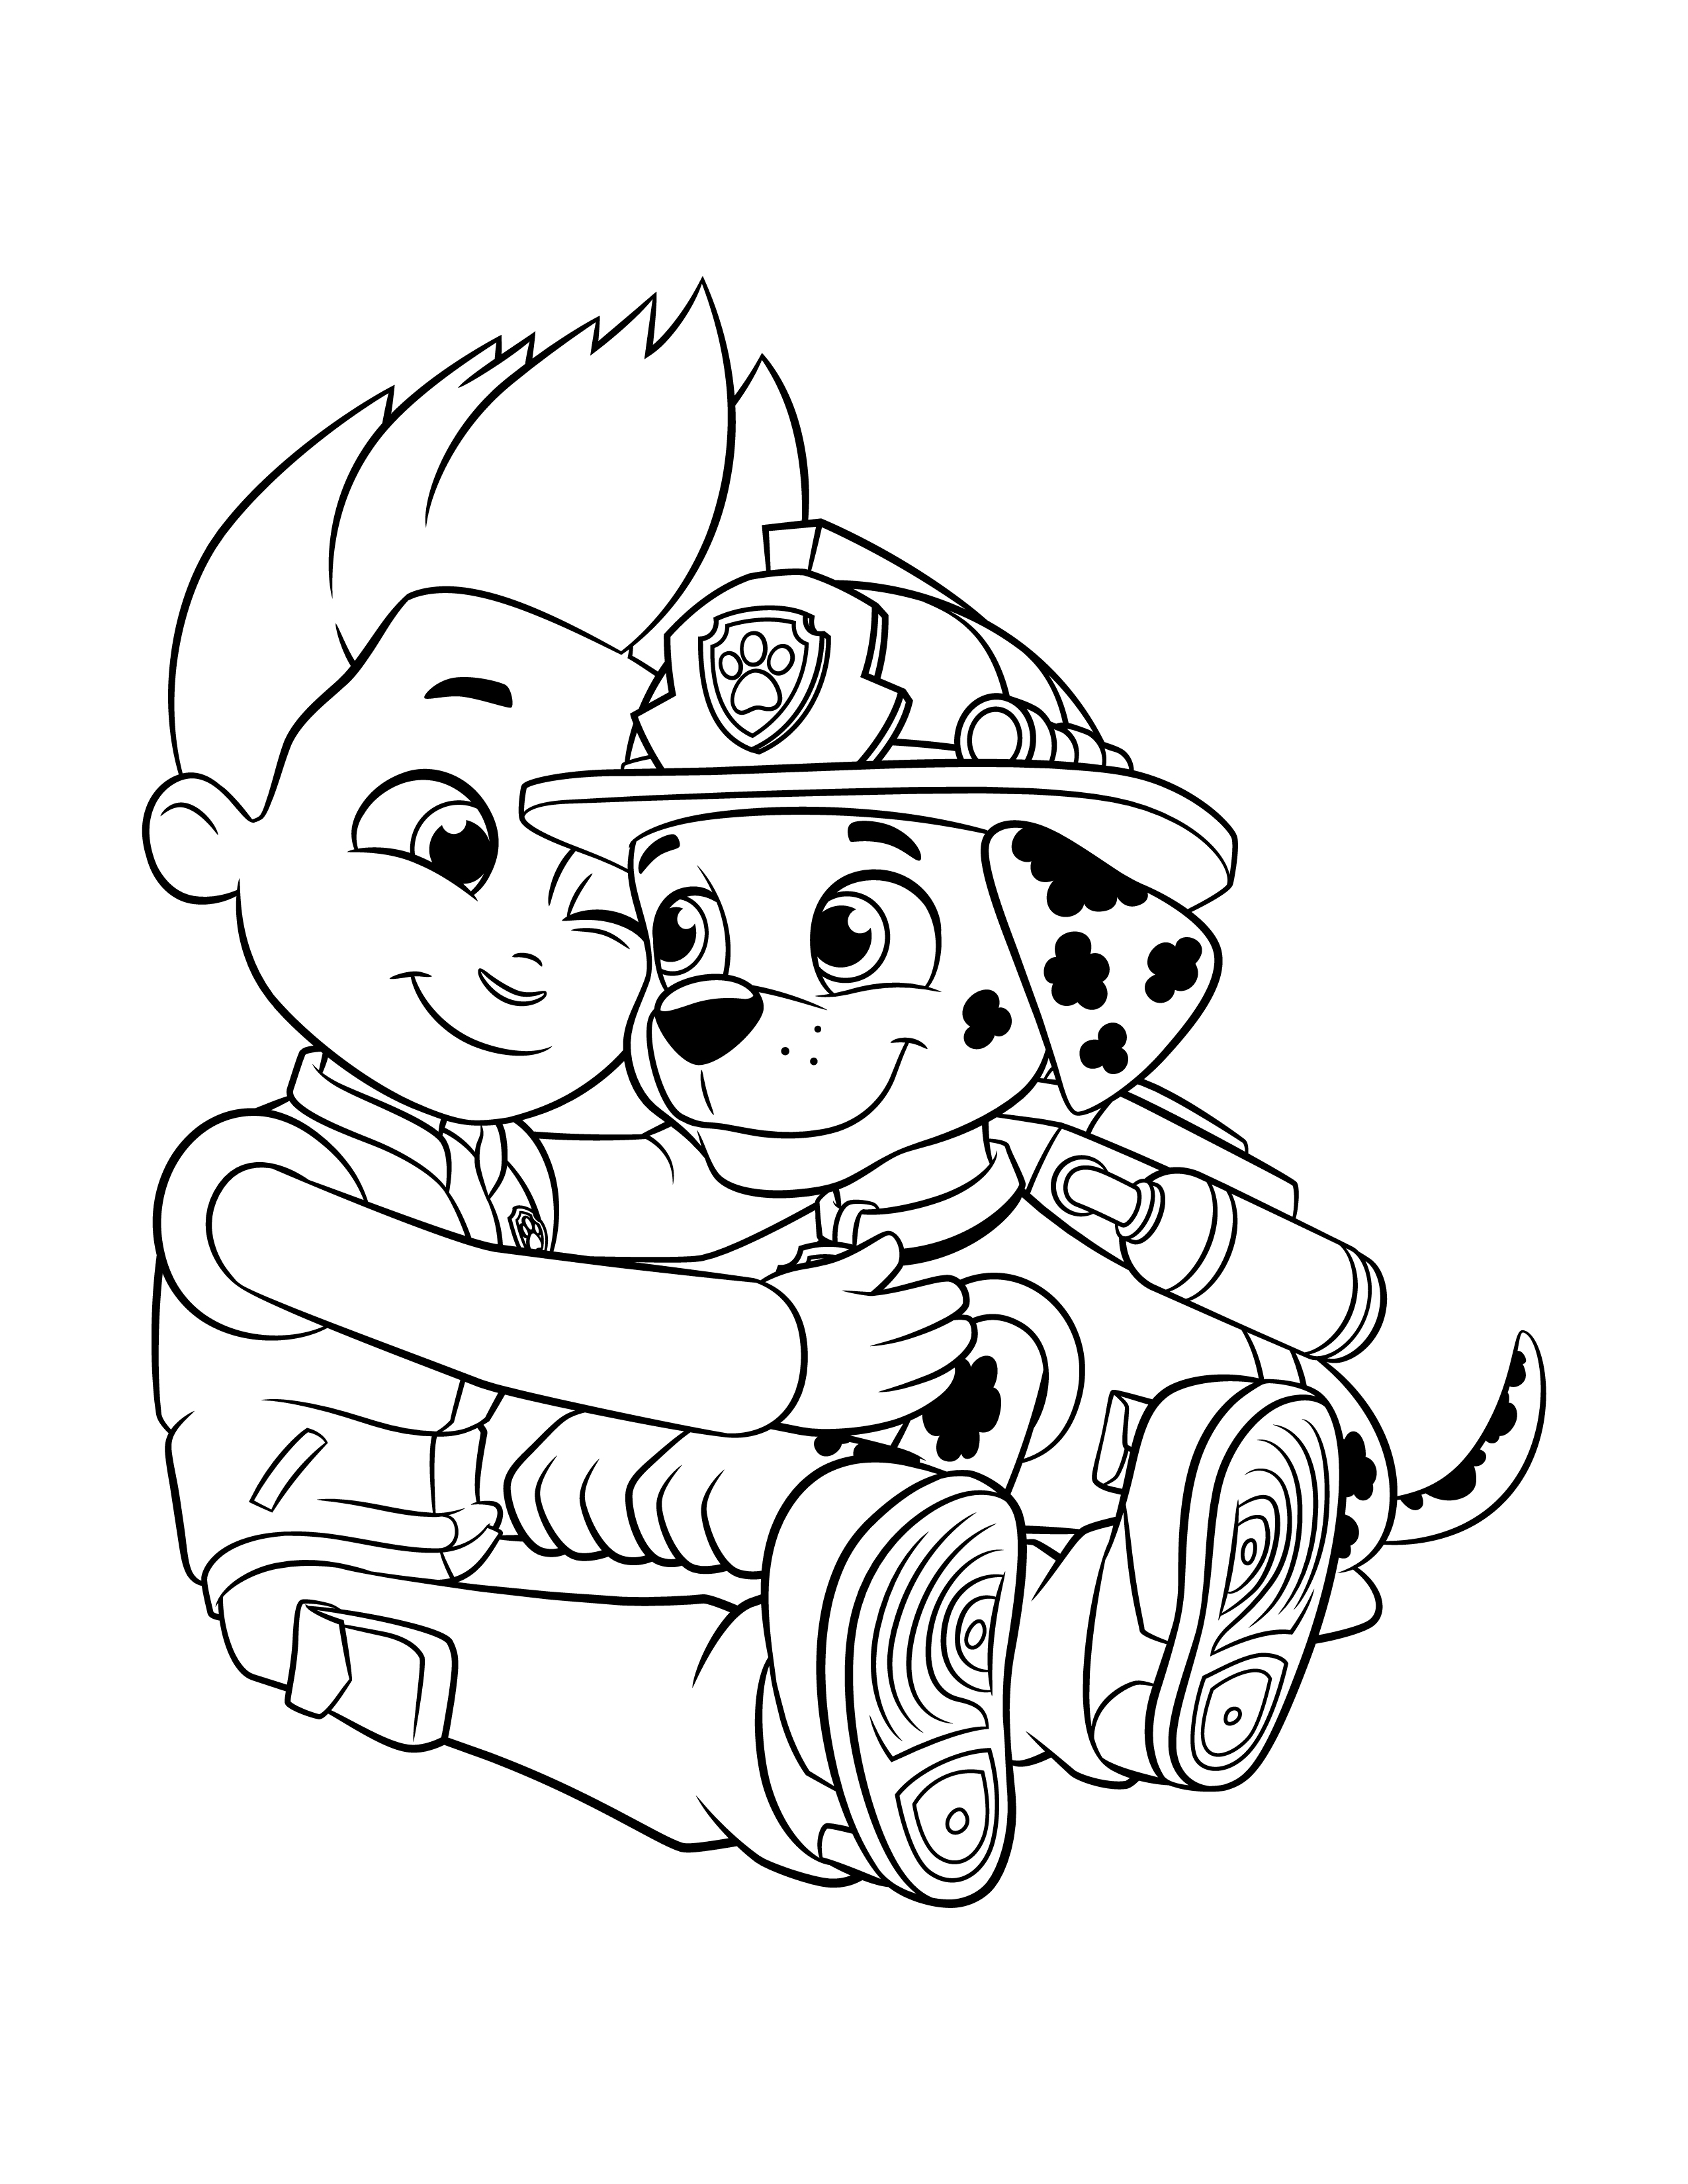 Arts and crafts for kids paw patrol